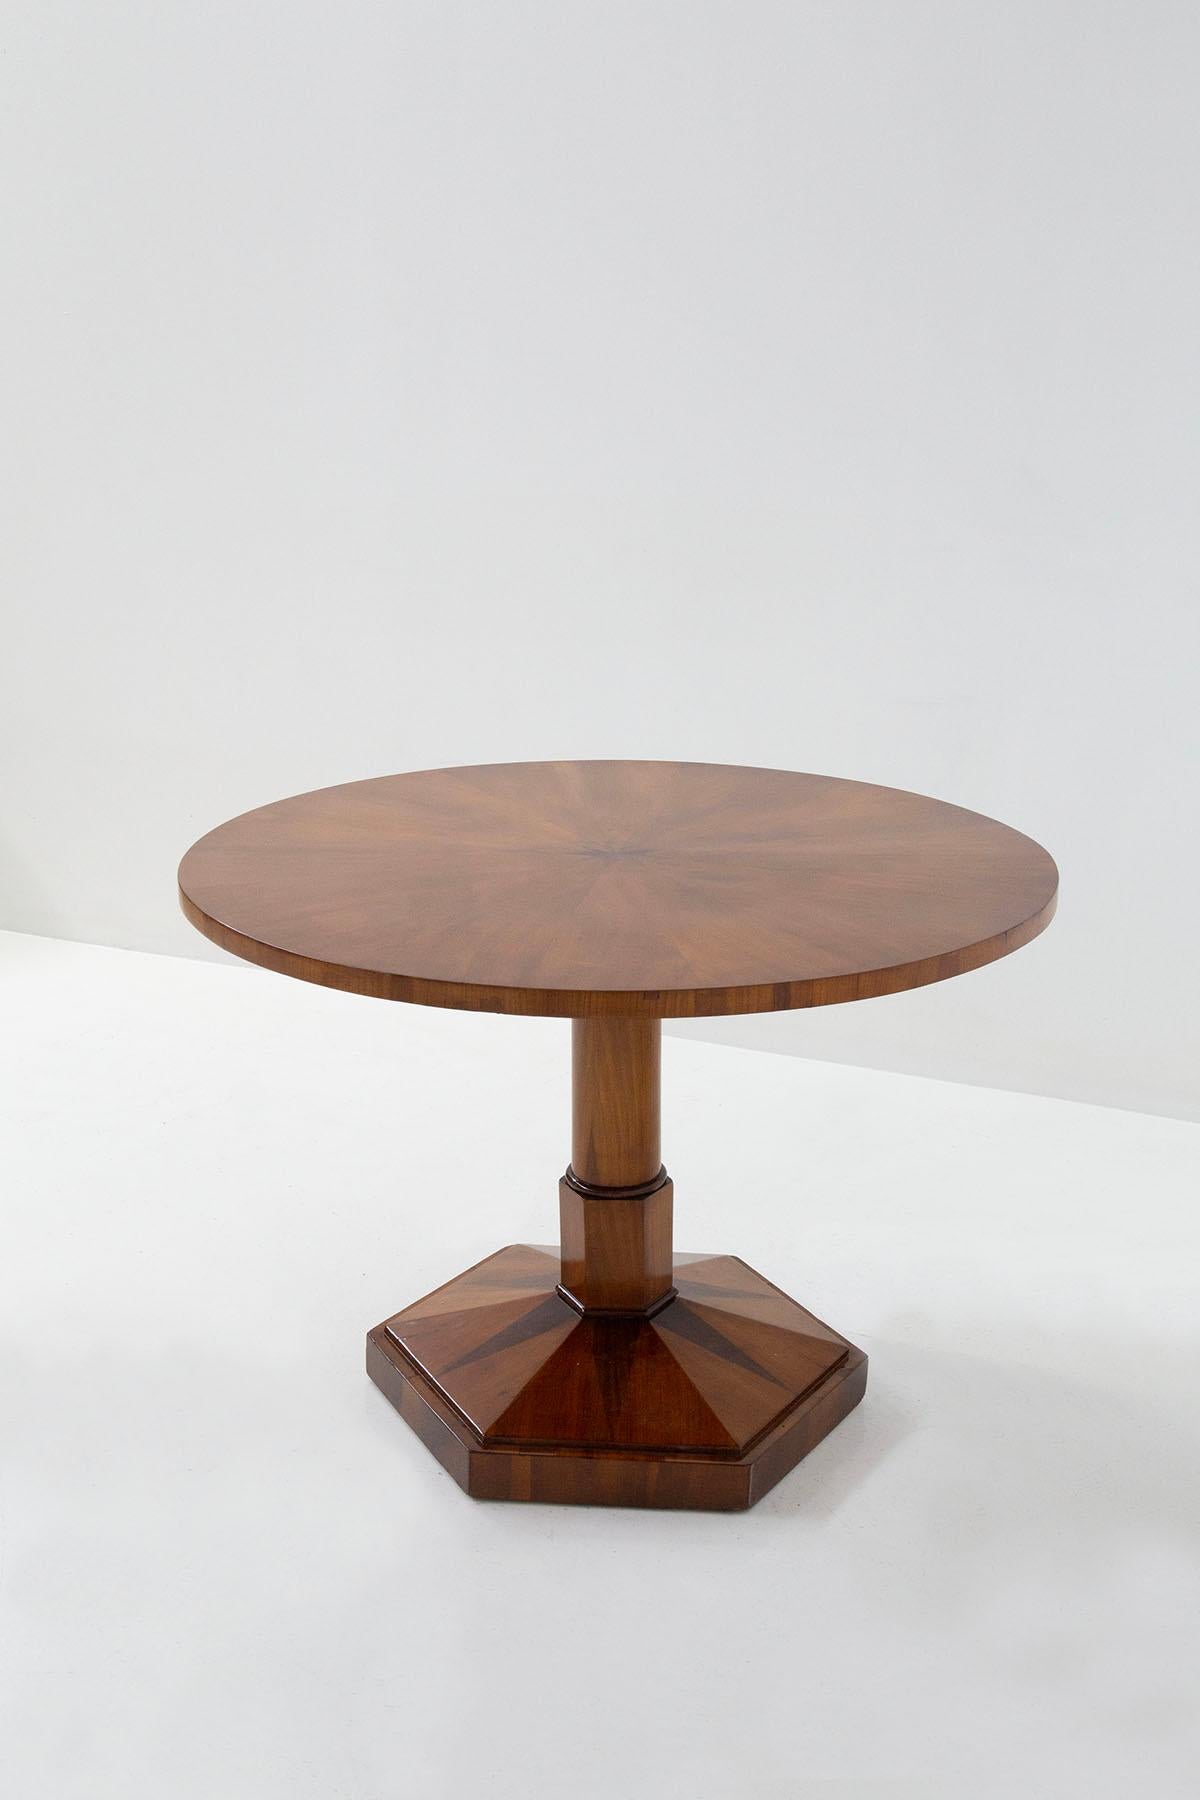 Exceptional pedestal table from the Biedermeier era made by great cabinetmakers. Its pieces reflect innovative design and craftsmanship of the highest quality.
The Biedermeier, with their sophisticated proportions and rare and refined design,